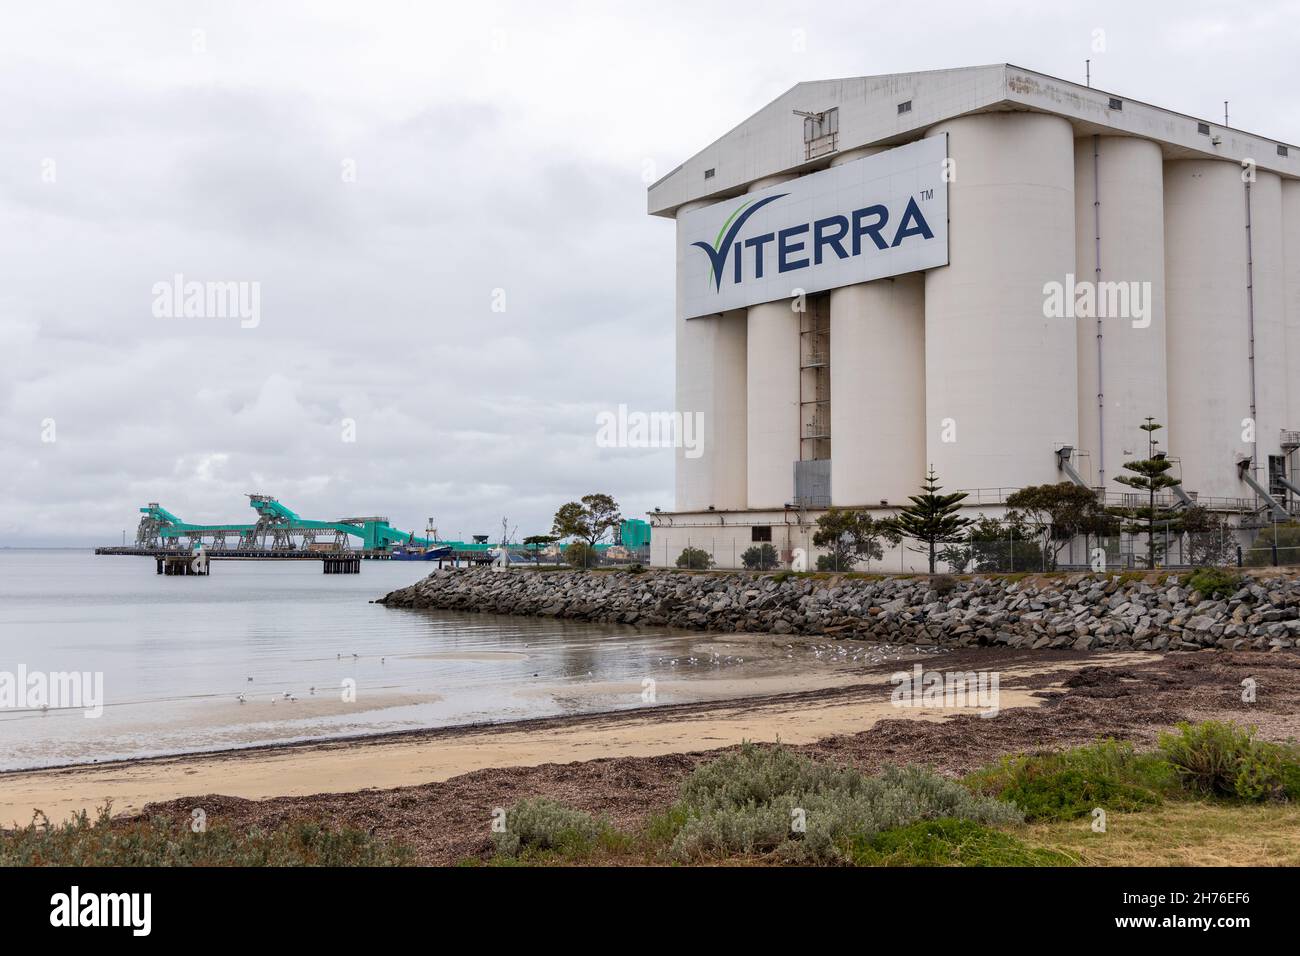 The iconic Viterra wheat and grain  storage silos and terminal located in Port Lincoln South Australia on November 19th 2021 Stock Photo